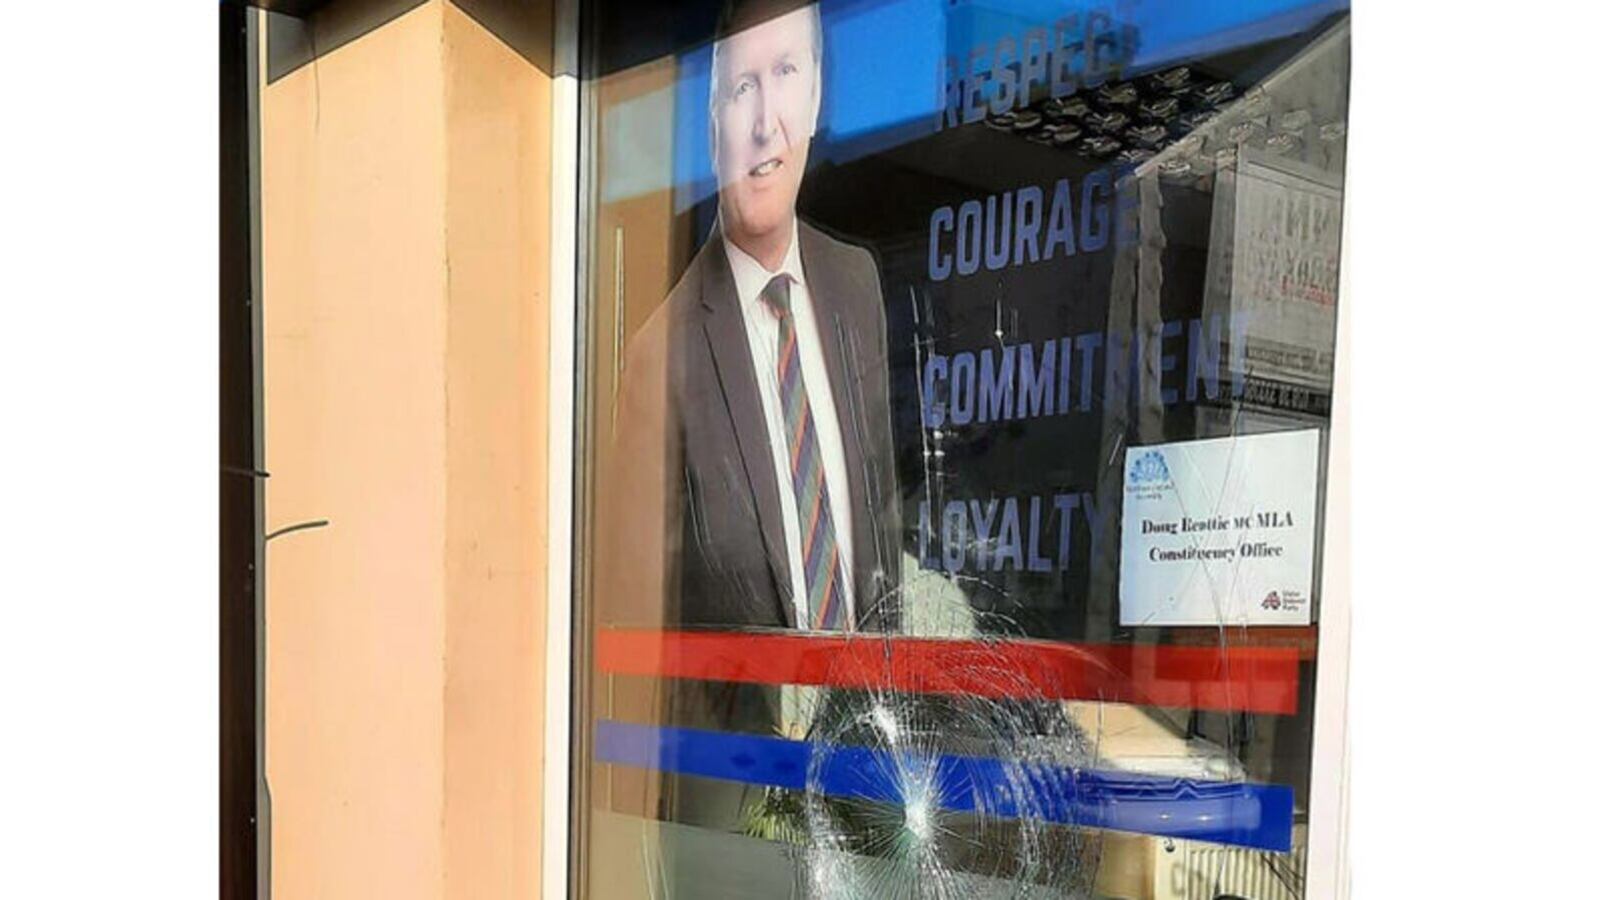 Damage caused at the Portadown office of UUP leader Doug Beattie in 2022.